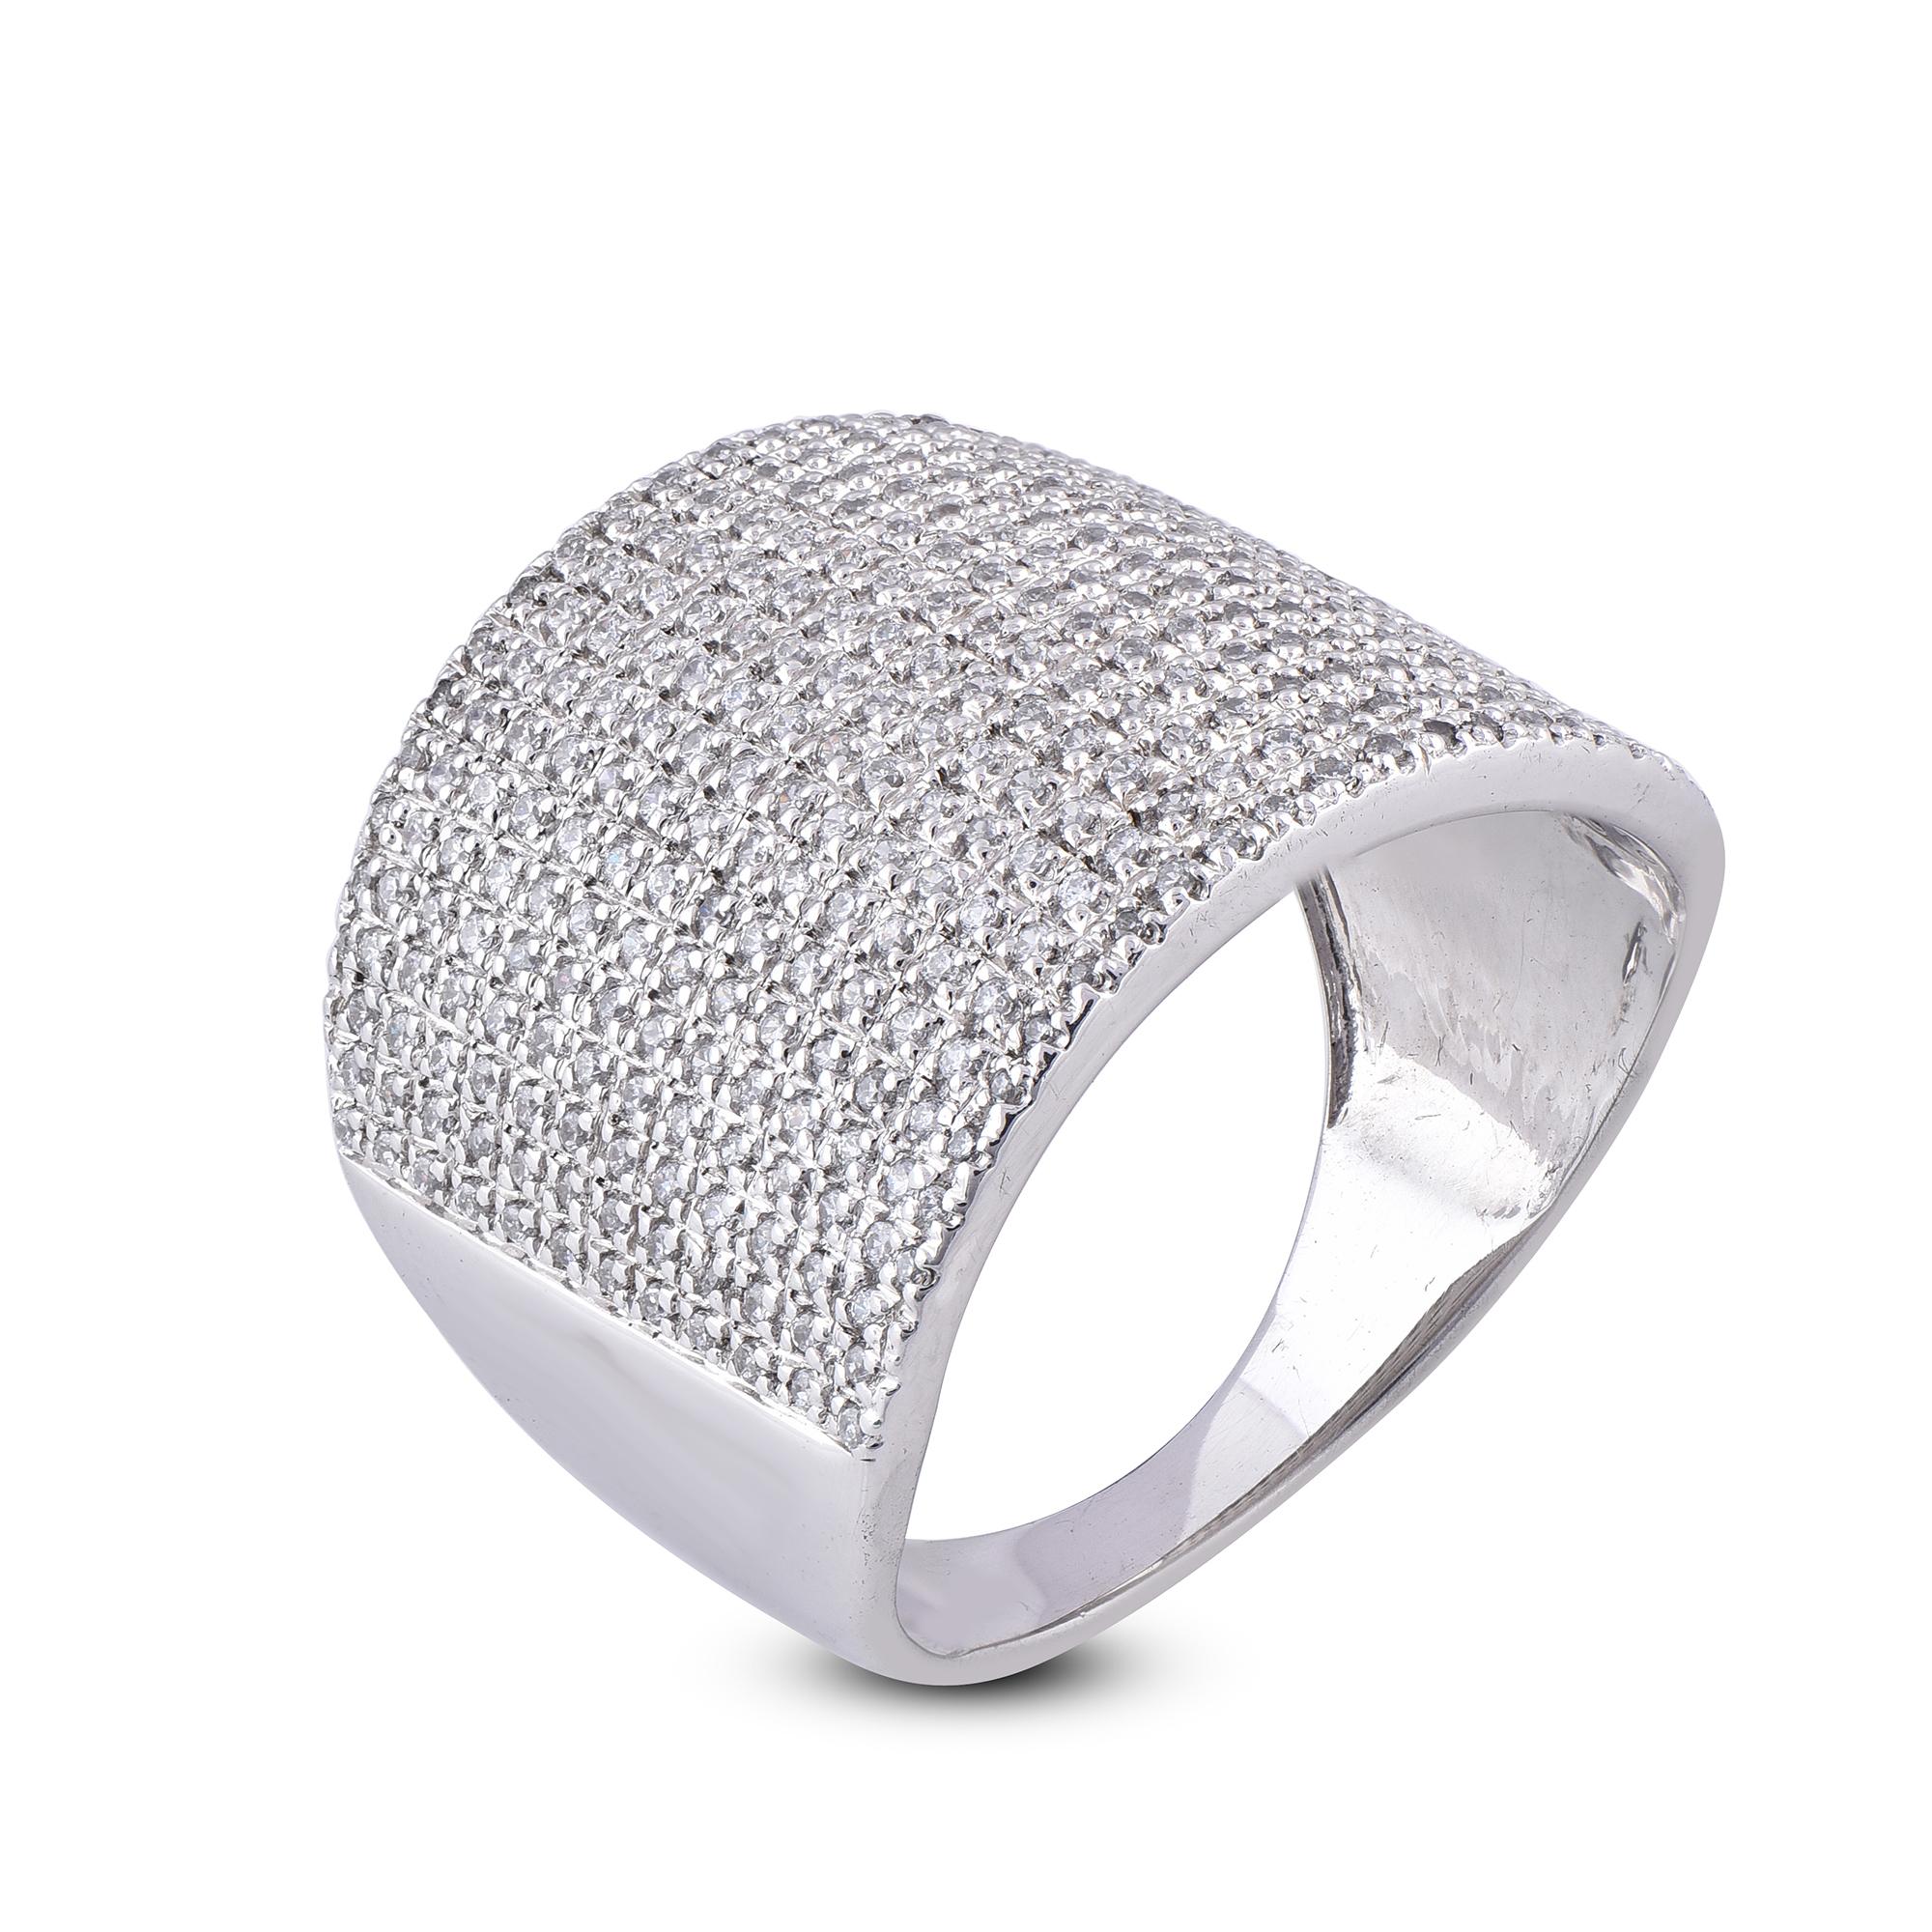 Stunning and classic, this diamond ring is beautifully crafted in 14 Kt White gold. The wide band is lined with rows of sparkling 310 round brilliant diamonds in secured prong settings. the diamonds are natural, not-treated and conflict-free with